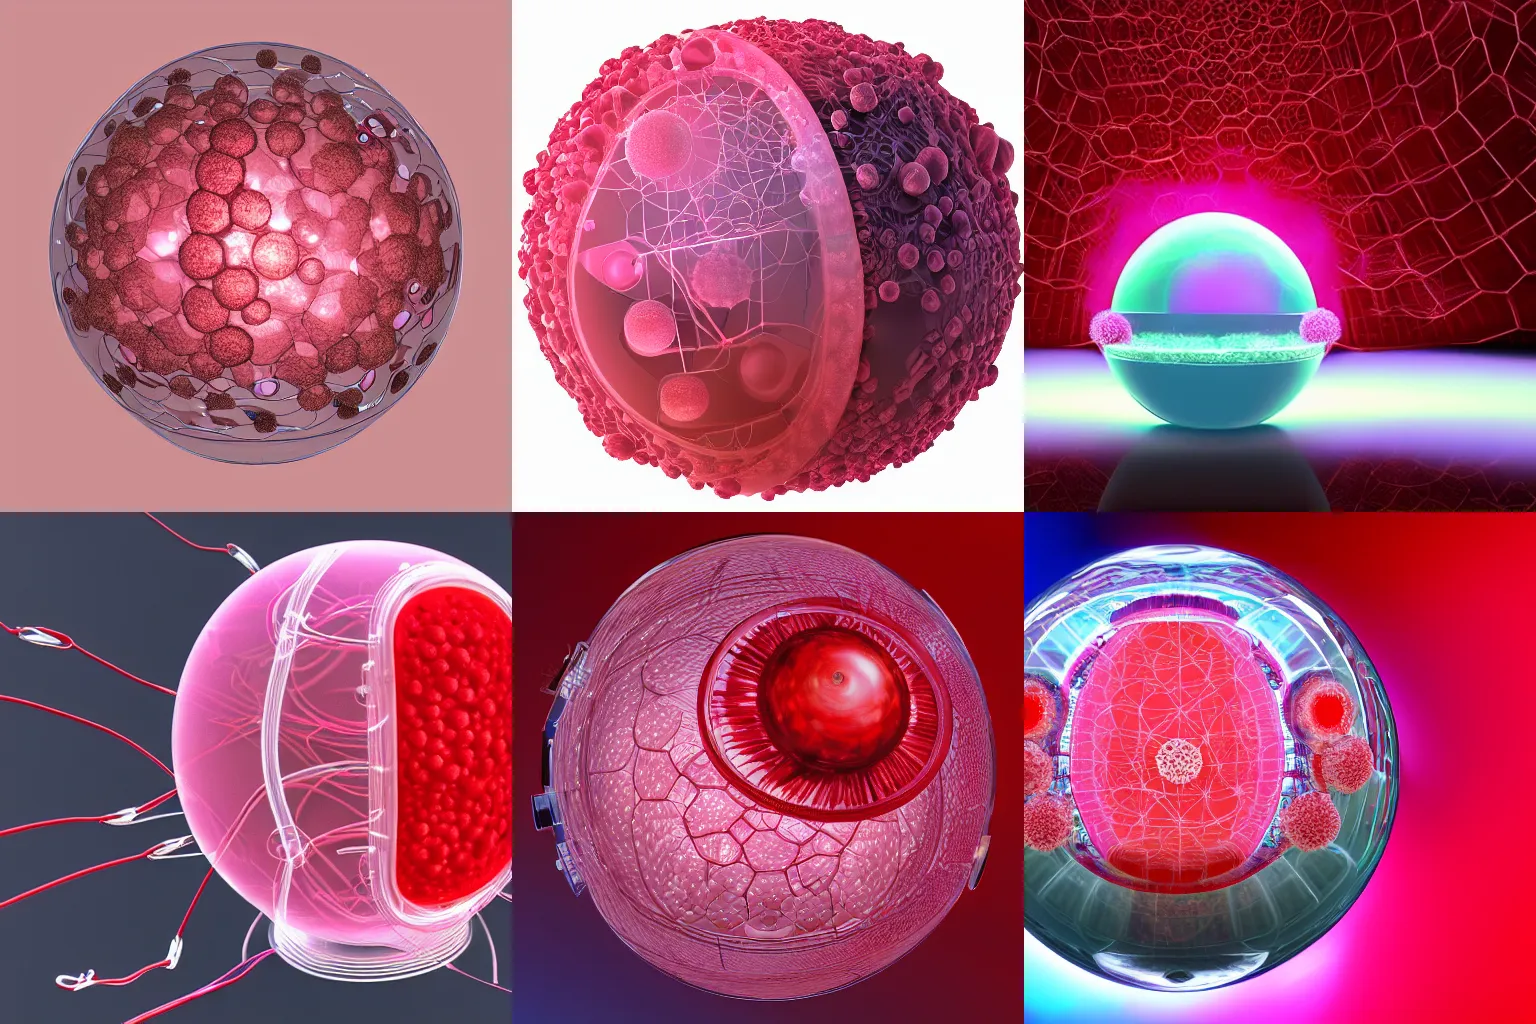 Prompt: big spherical cell with organoids and electronic implants and wires a photorealistic and detailed tesselated hyperbolic rendering with fish-eye effect in light pink and red shades